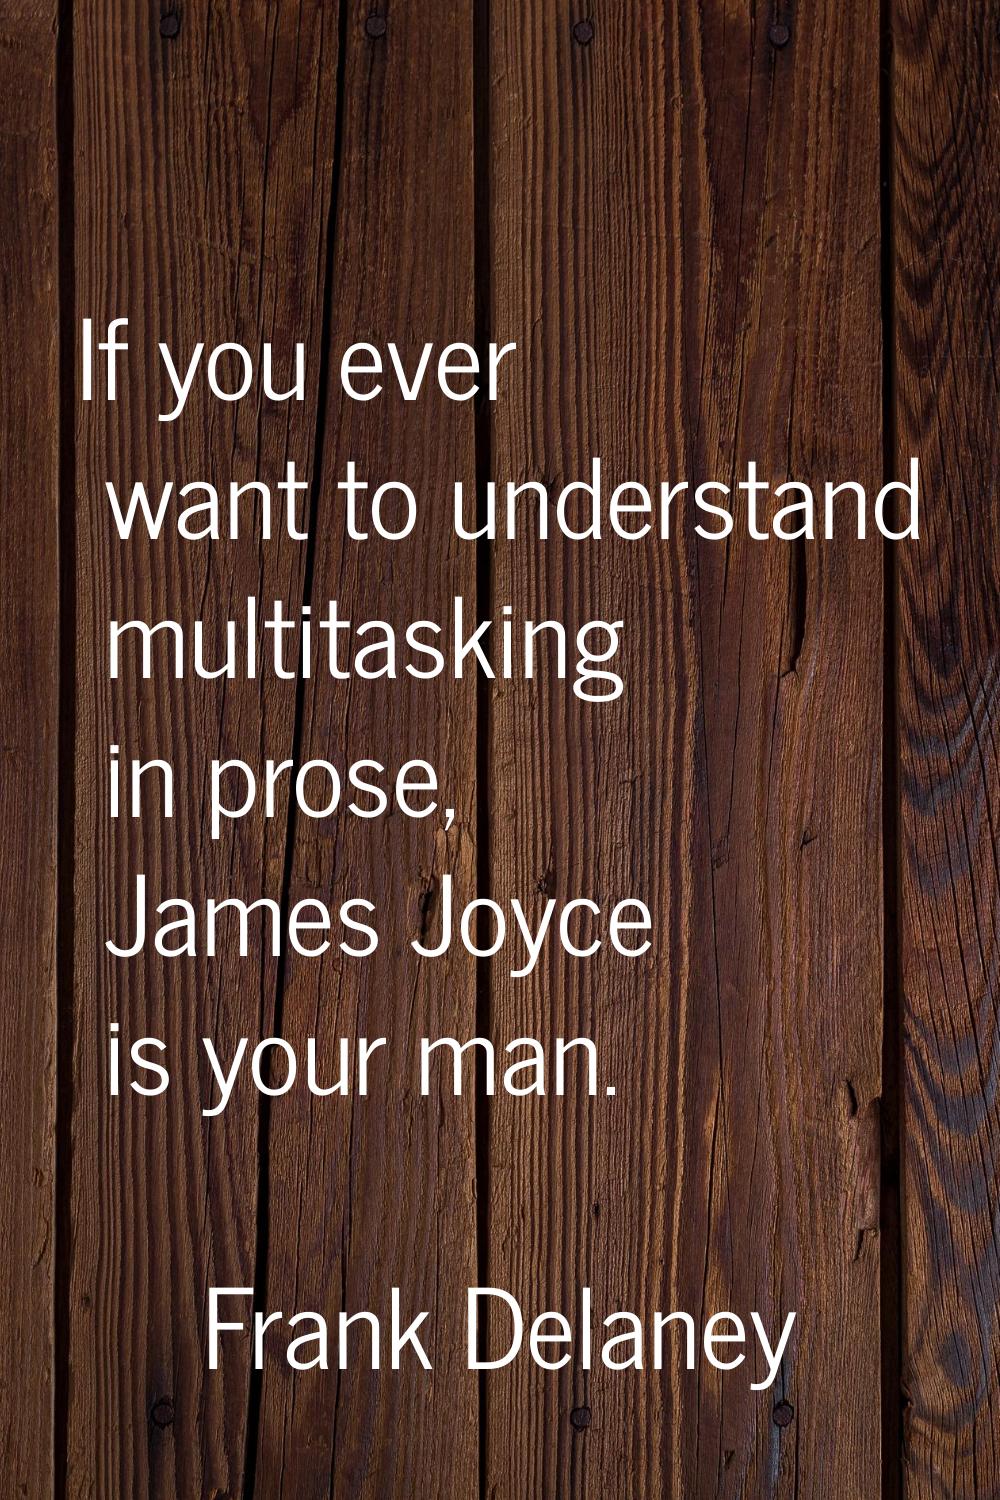 If you ever want to understand multitasking in prose, James Joyce is your man.